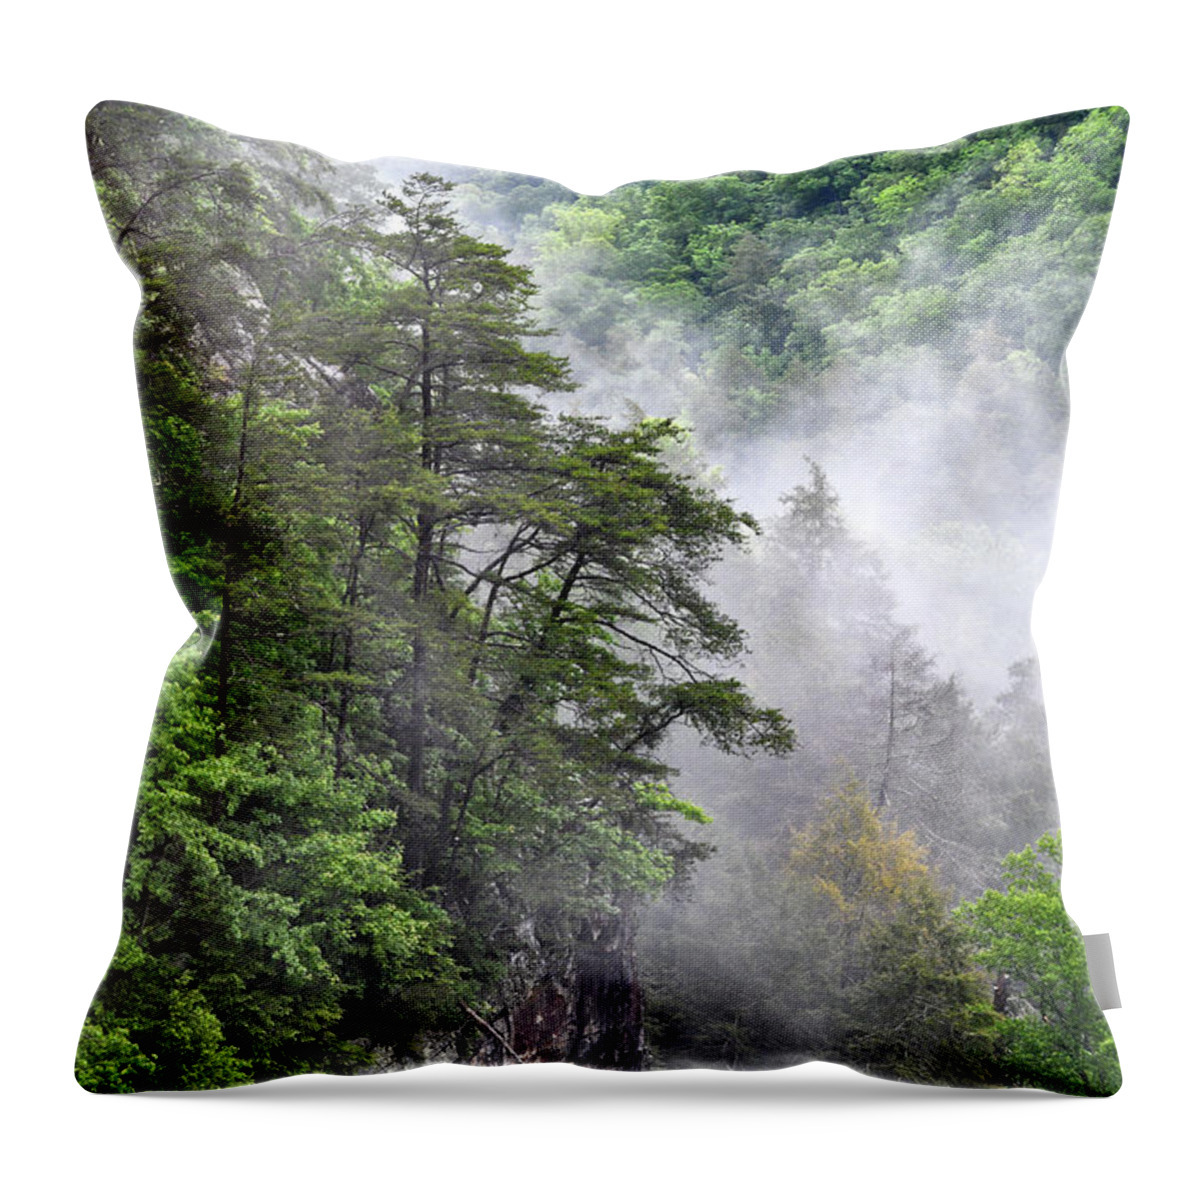 Fall Creek Falls Throw Pillow featuring the photograph Fog In Valley 2 by Phil Perkins